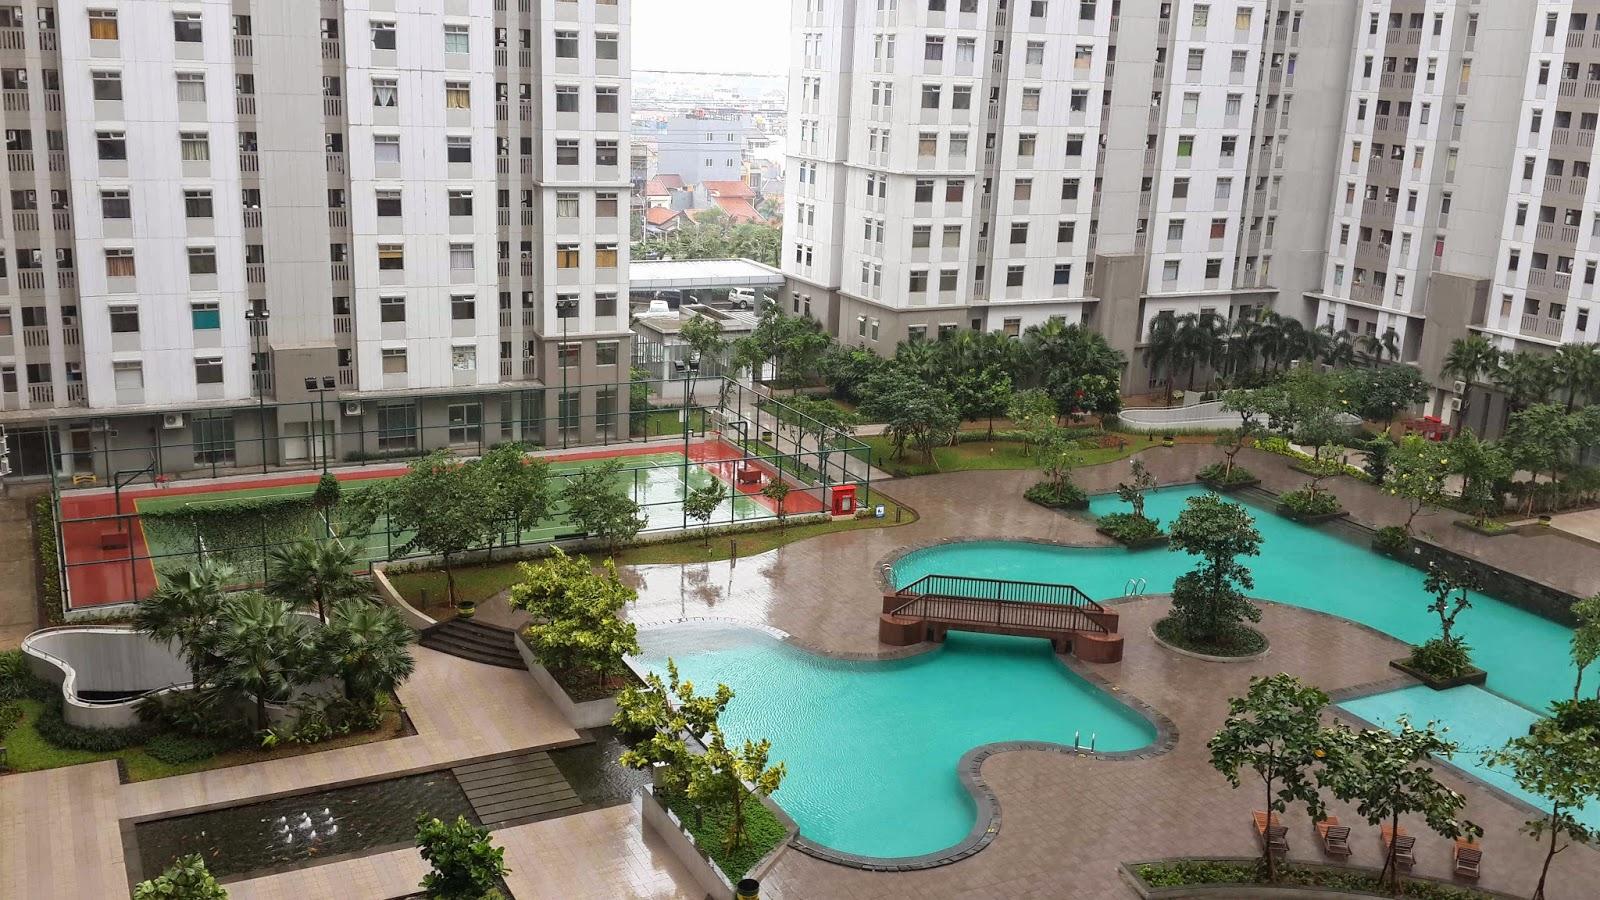 6 Recommended Apartments & Co-Living Near Soekarno-Hatta Airport